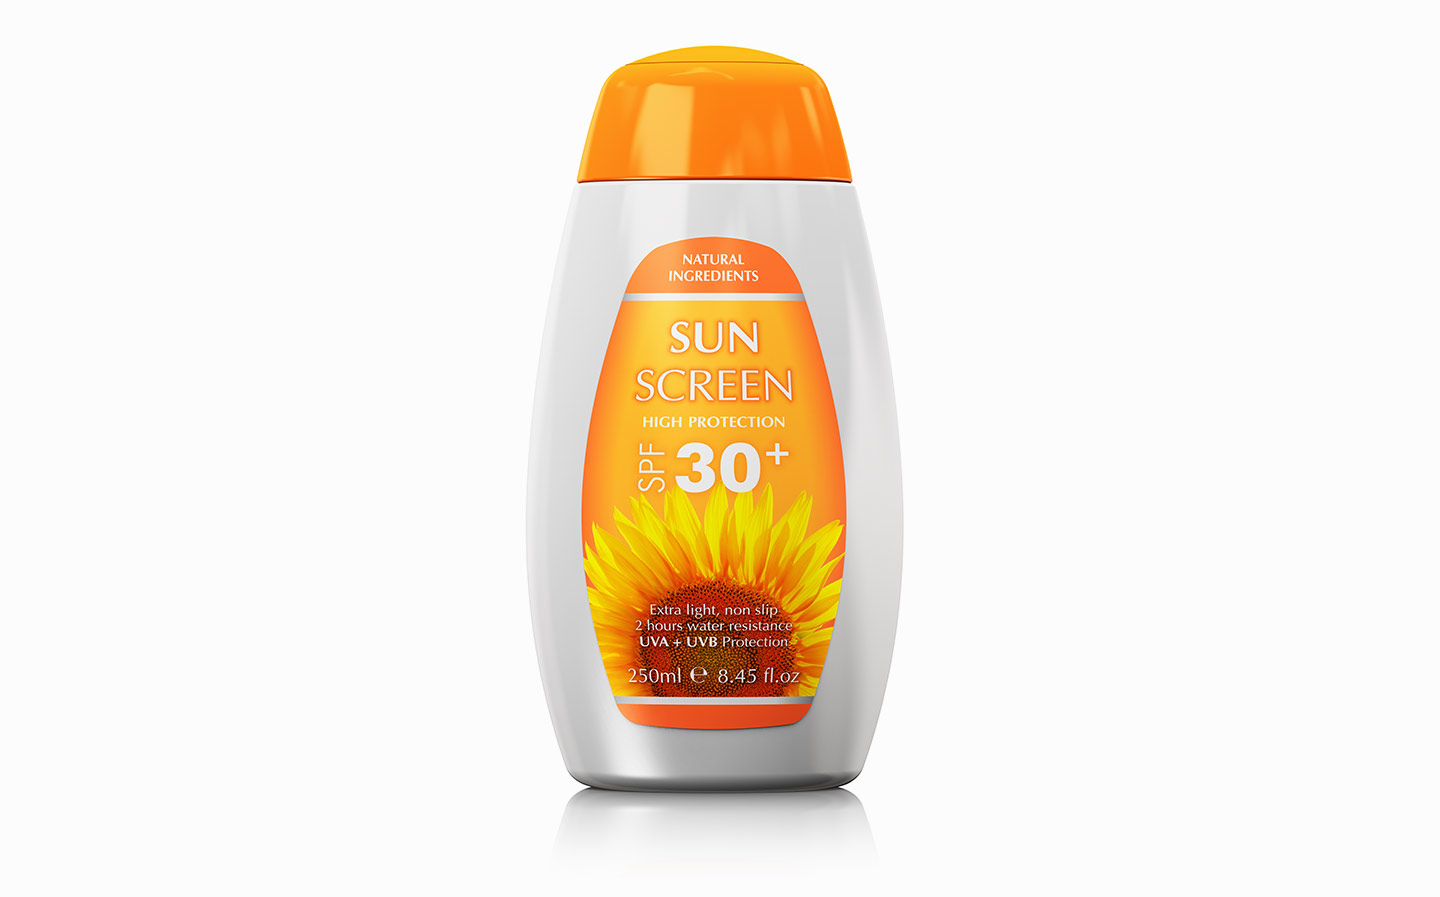 12 things drivers shouldn’t leave in a hot car: SUNCREAM